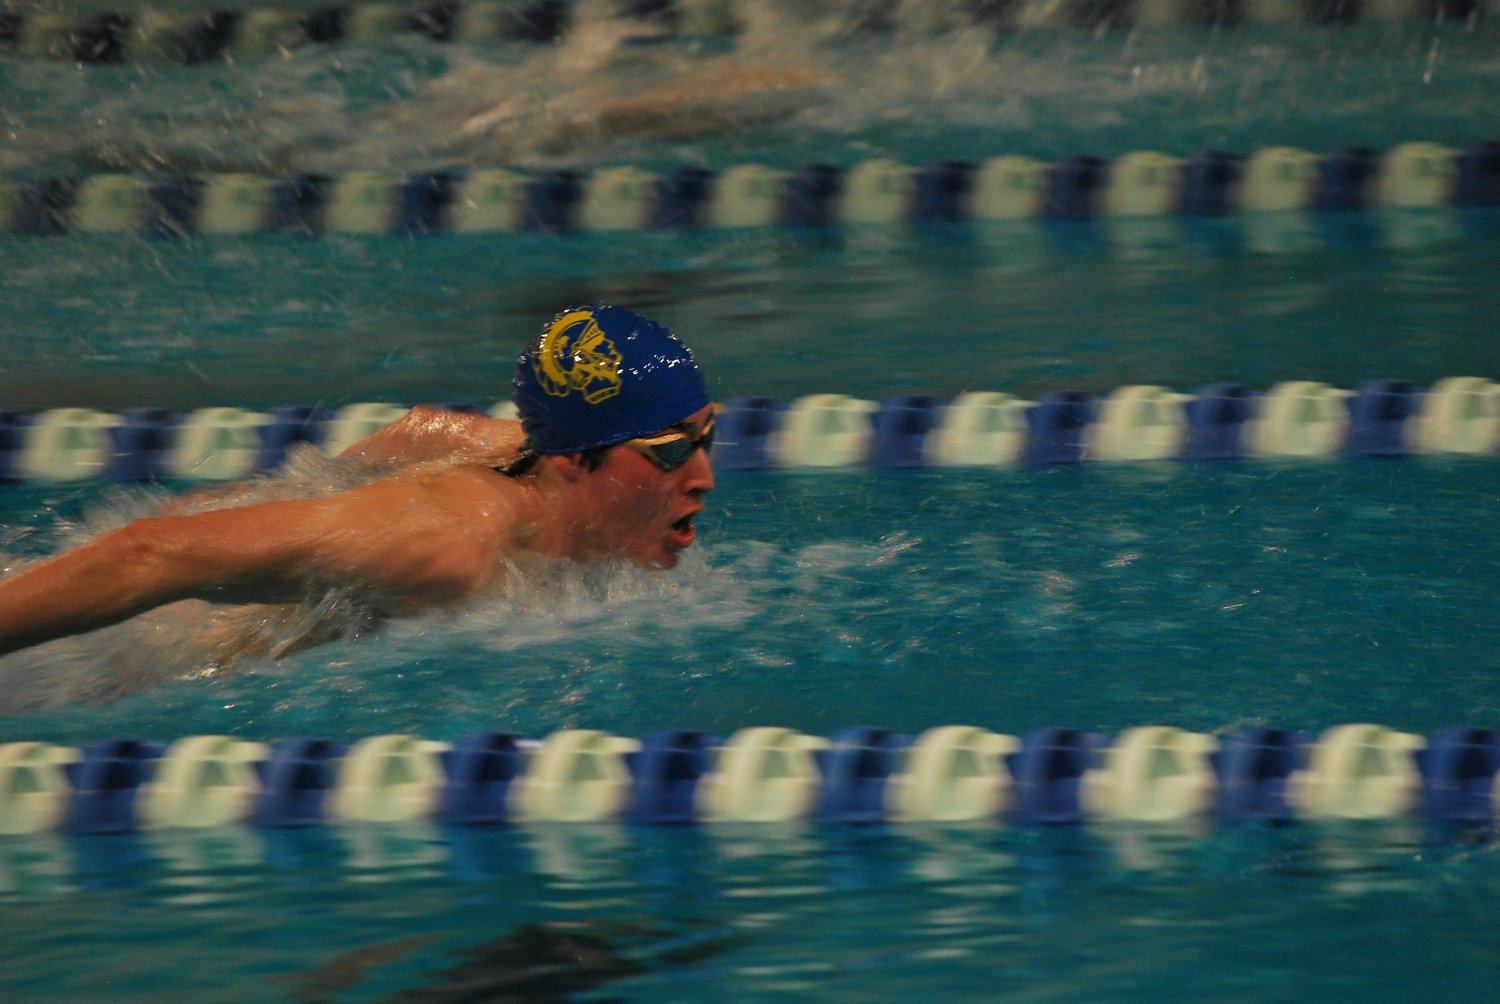 Marshall Horton took home wins in the 200 IM, 100 Breaststroke, and the 200 and 400 freestyle relays.